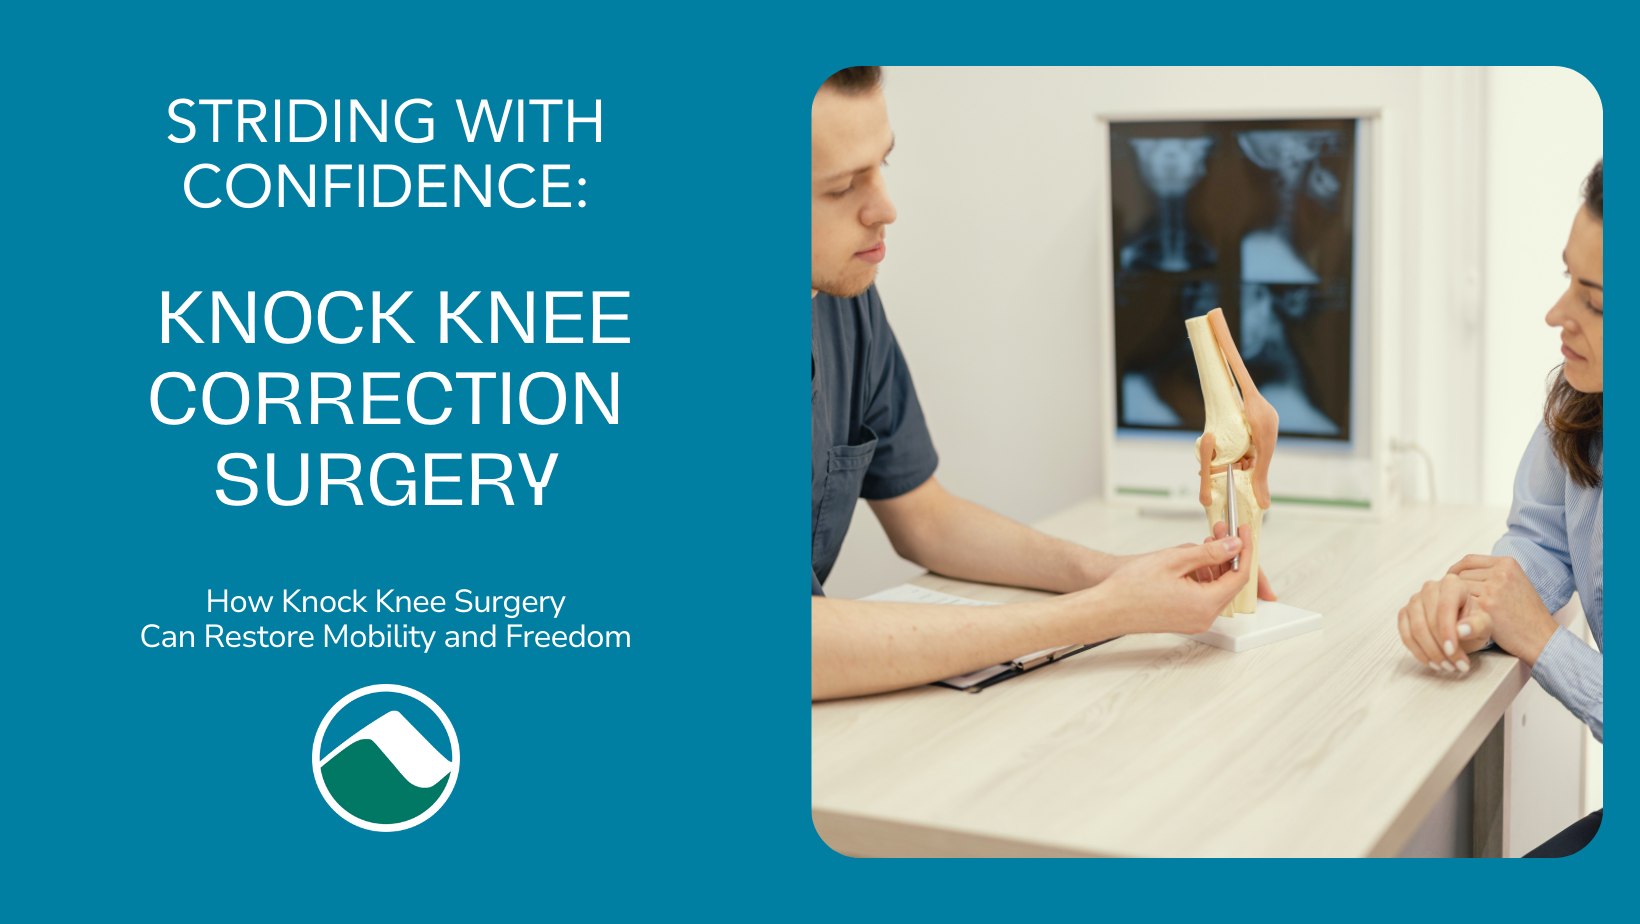 Striding with Confidence: Knock Knee Correction Surgery at Monadnock Orthopaedic Associates How surgery can restore mobility and freedom